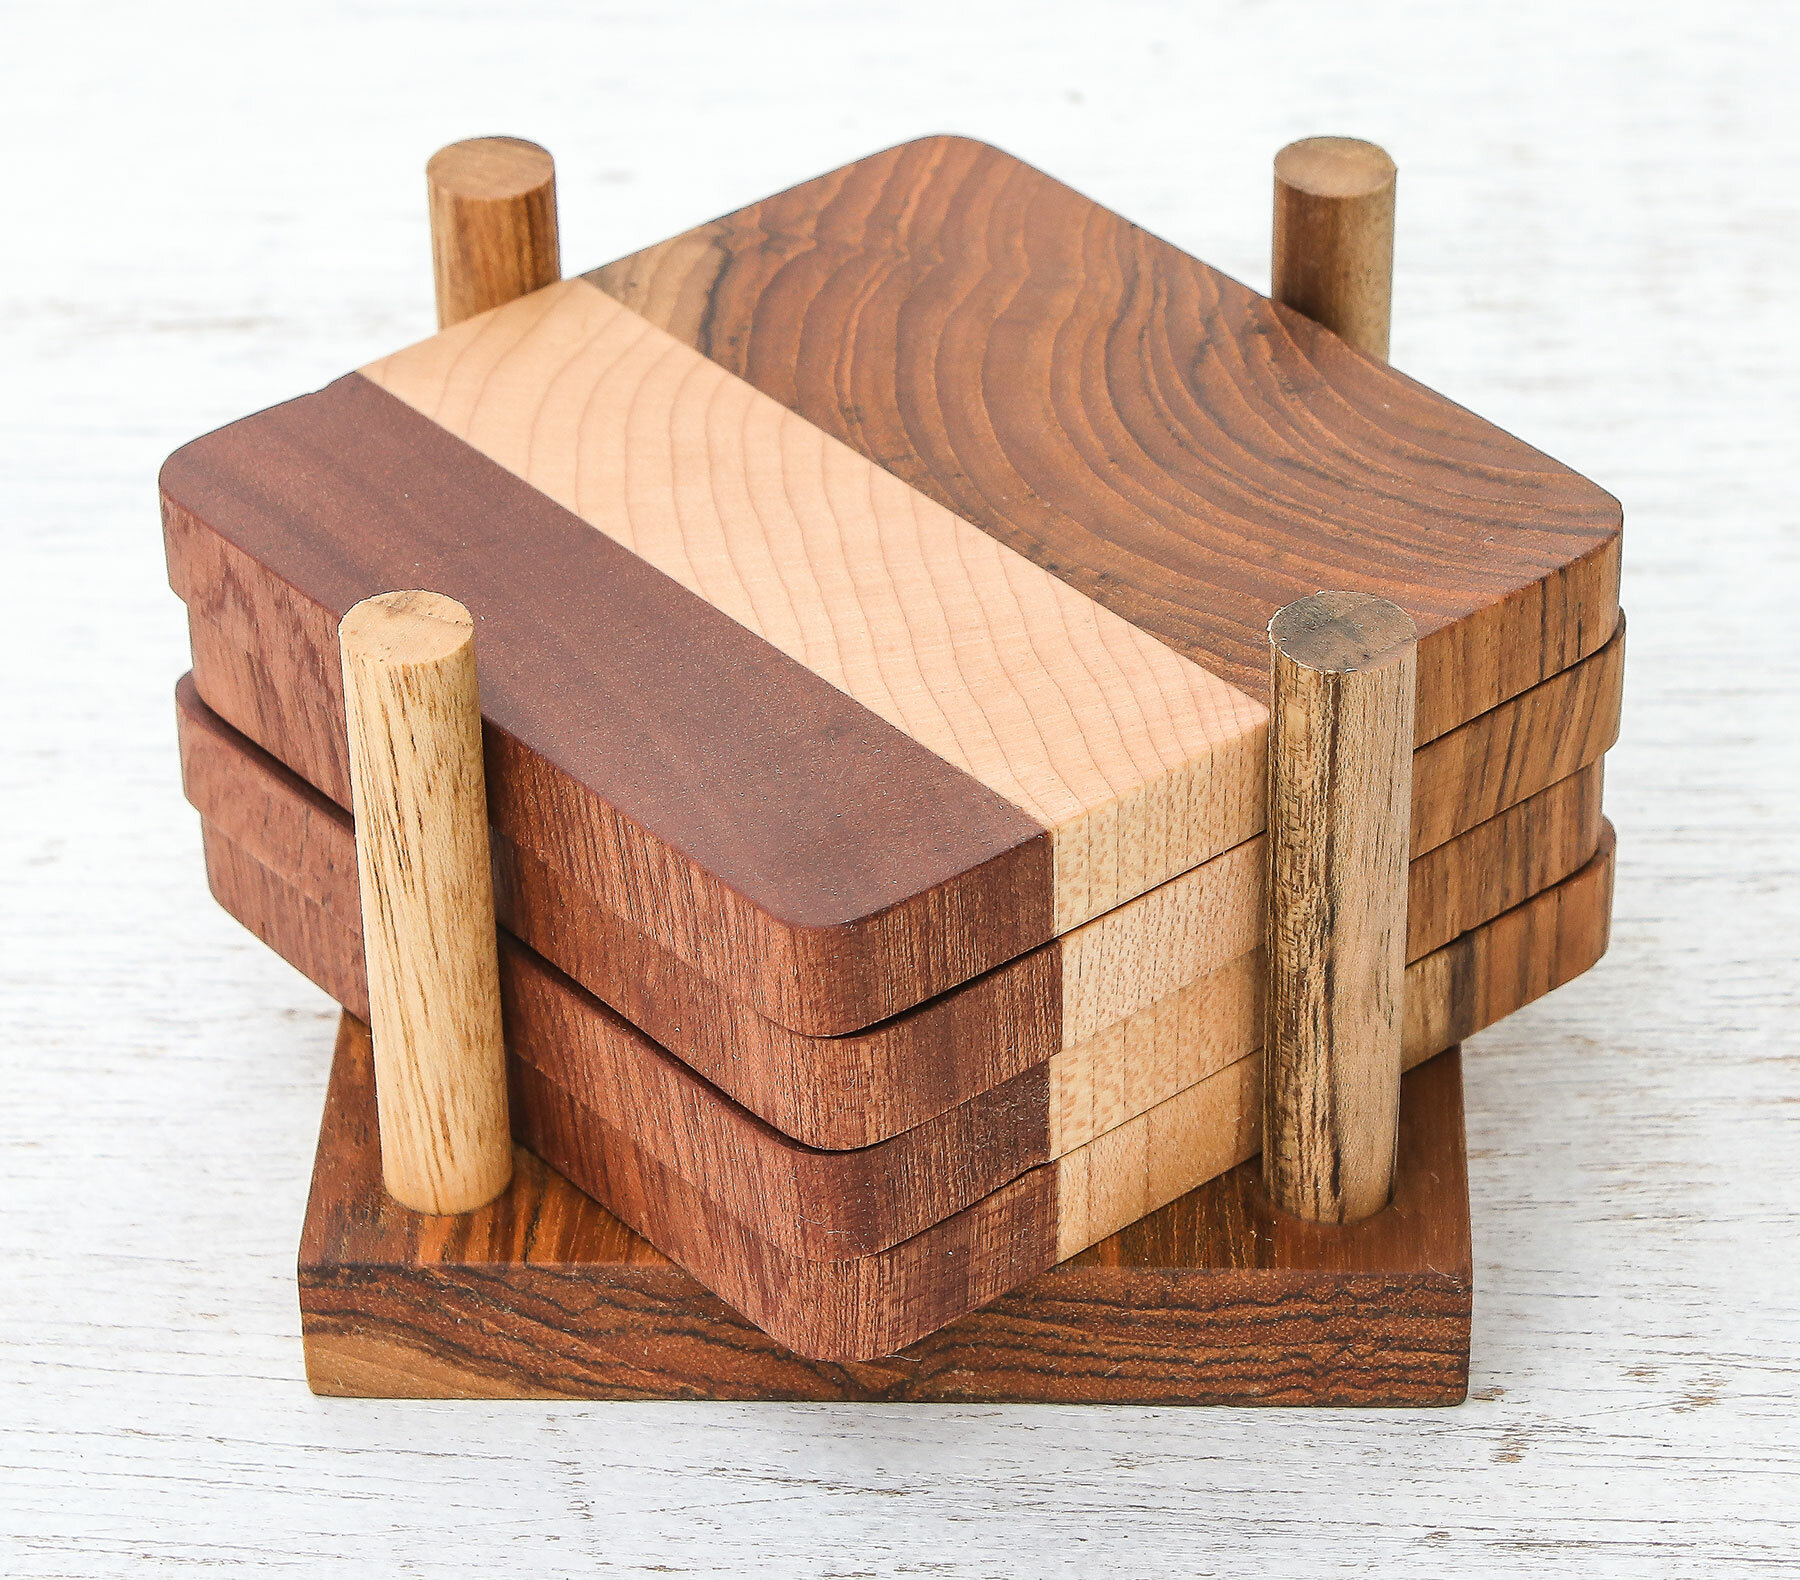 BUY Wooden Coasters ON SALE NOW! - Wooden Earth